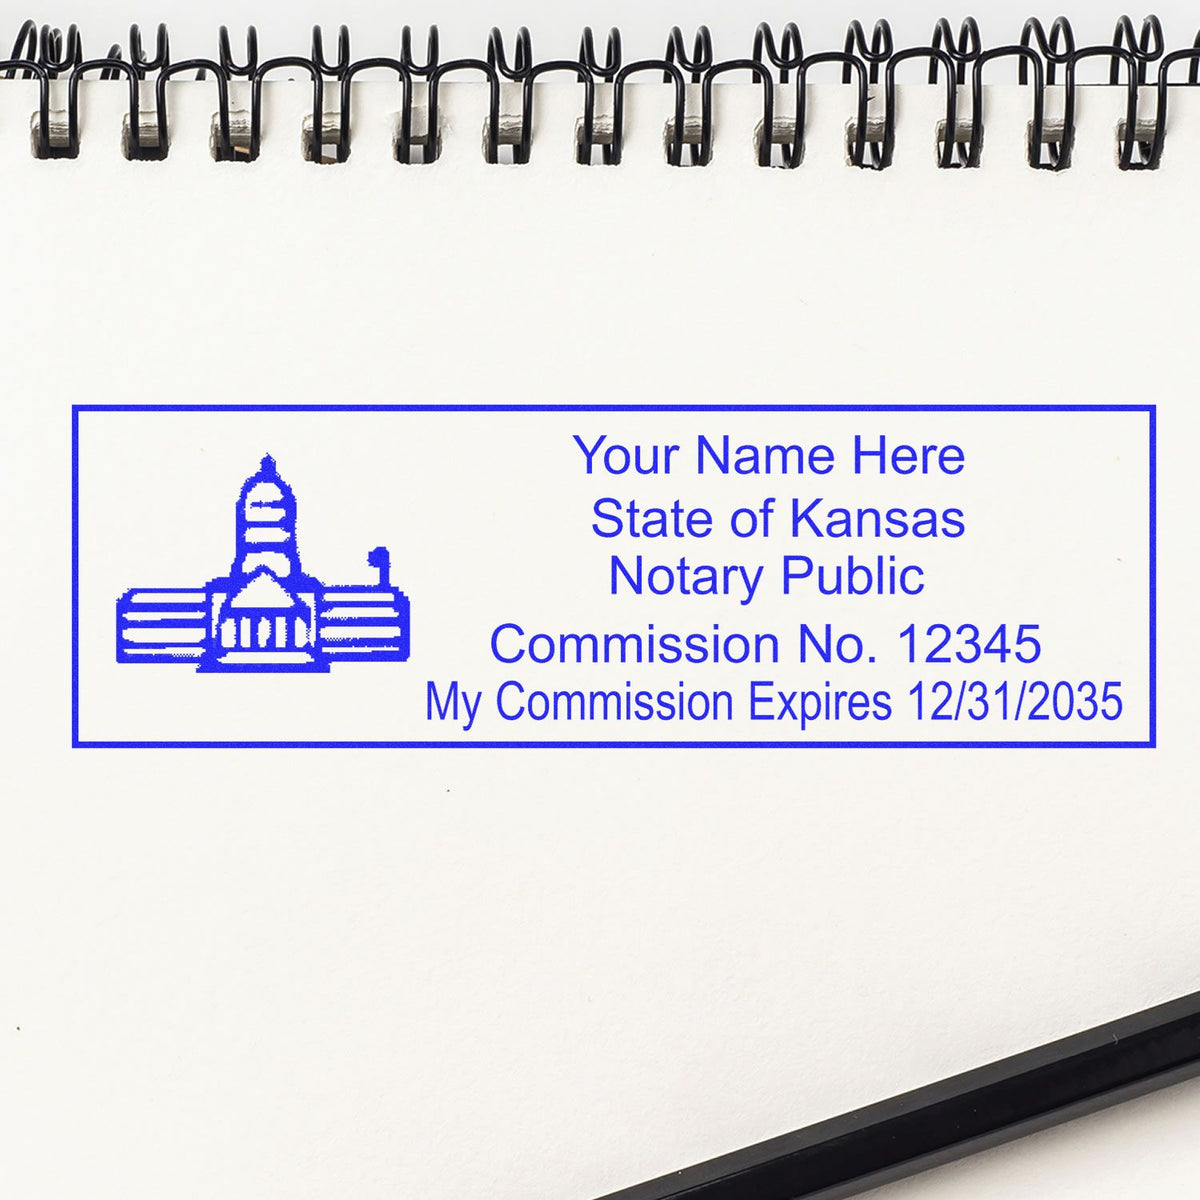 This paper is stamped with a sample imprint of the Slim Pre-Inked State Seal Notary Stamp for Kansas, signifying its quality and reliability.